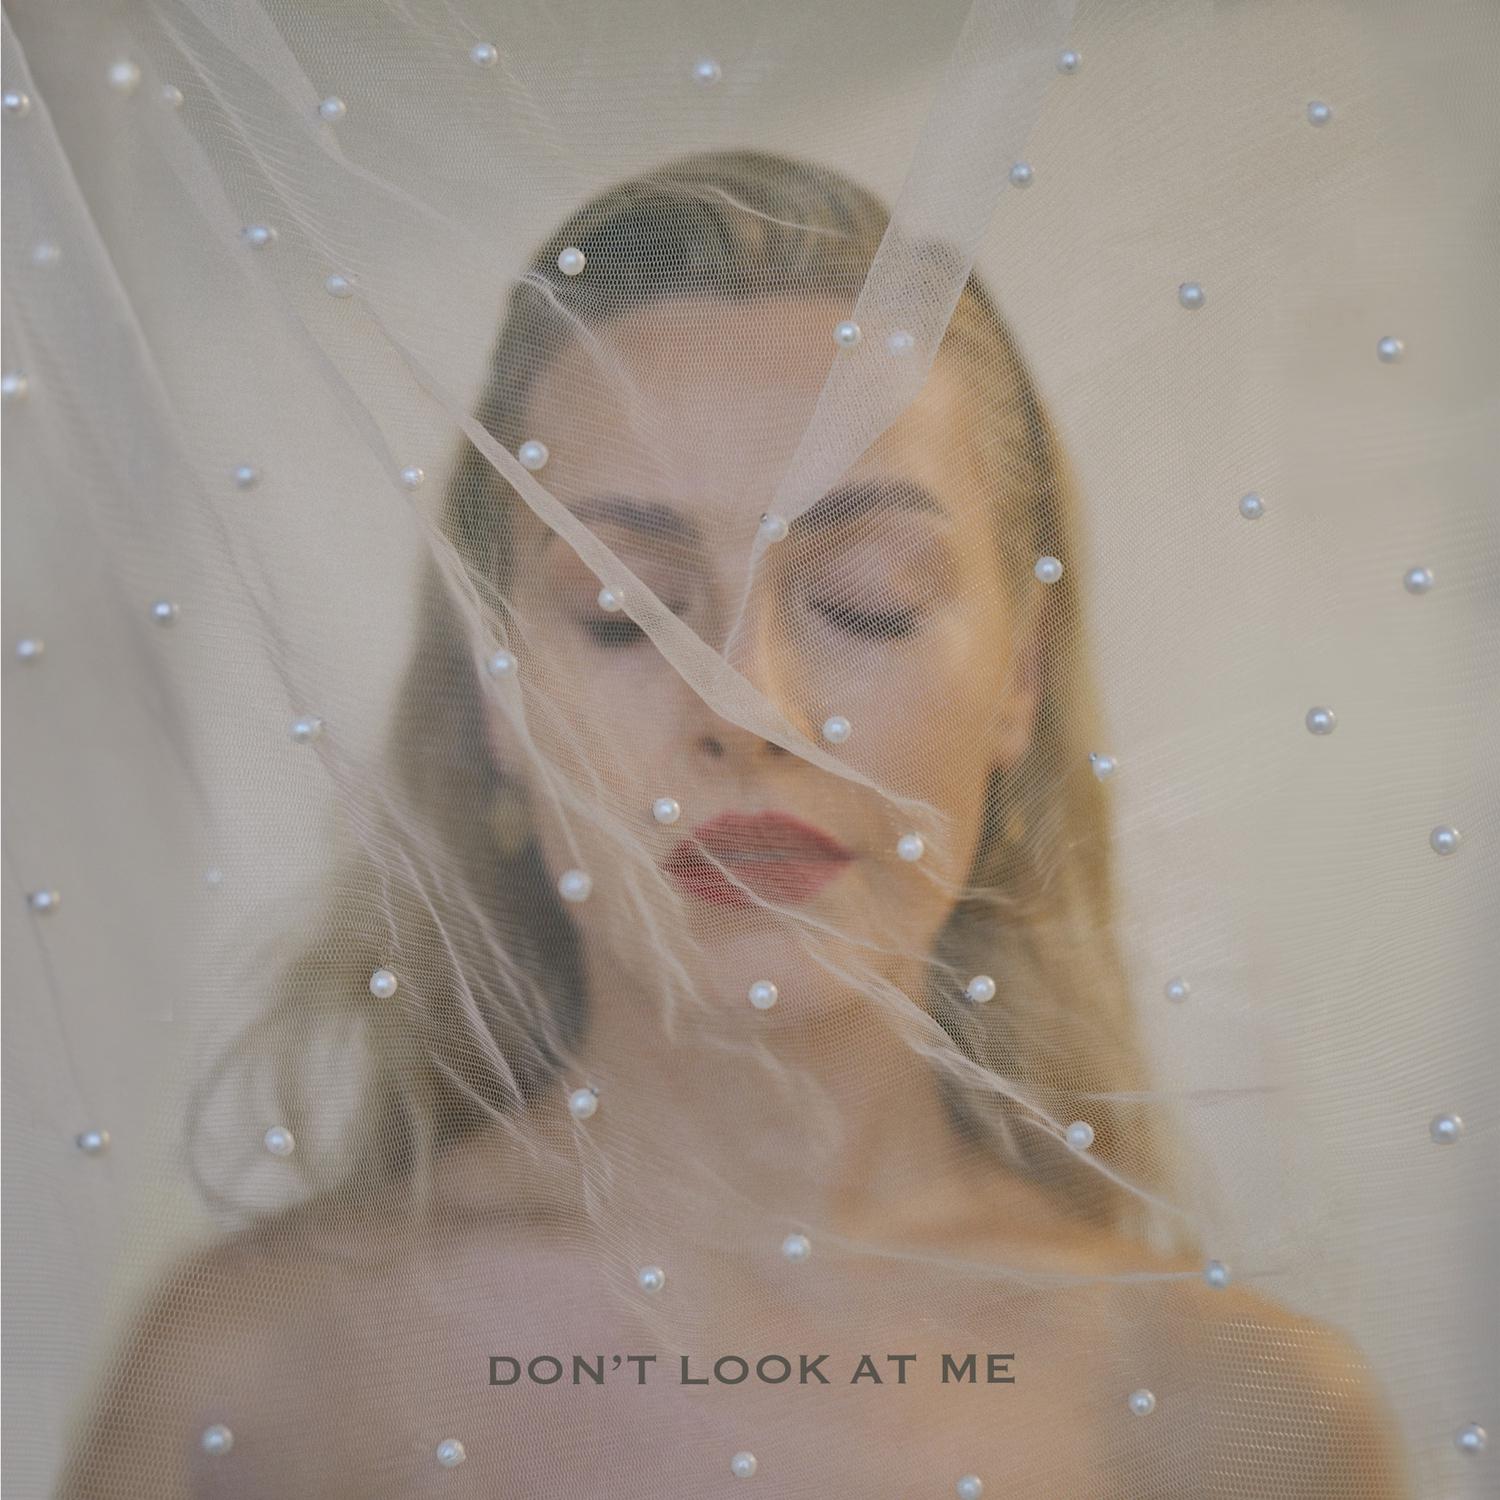 iiola - Don’t Look At Me